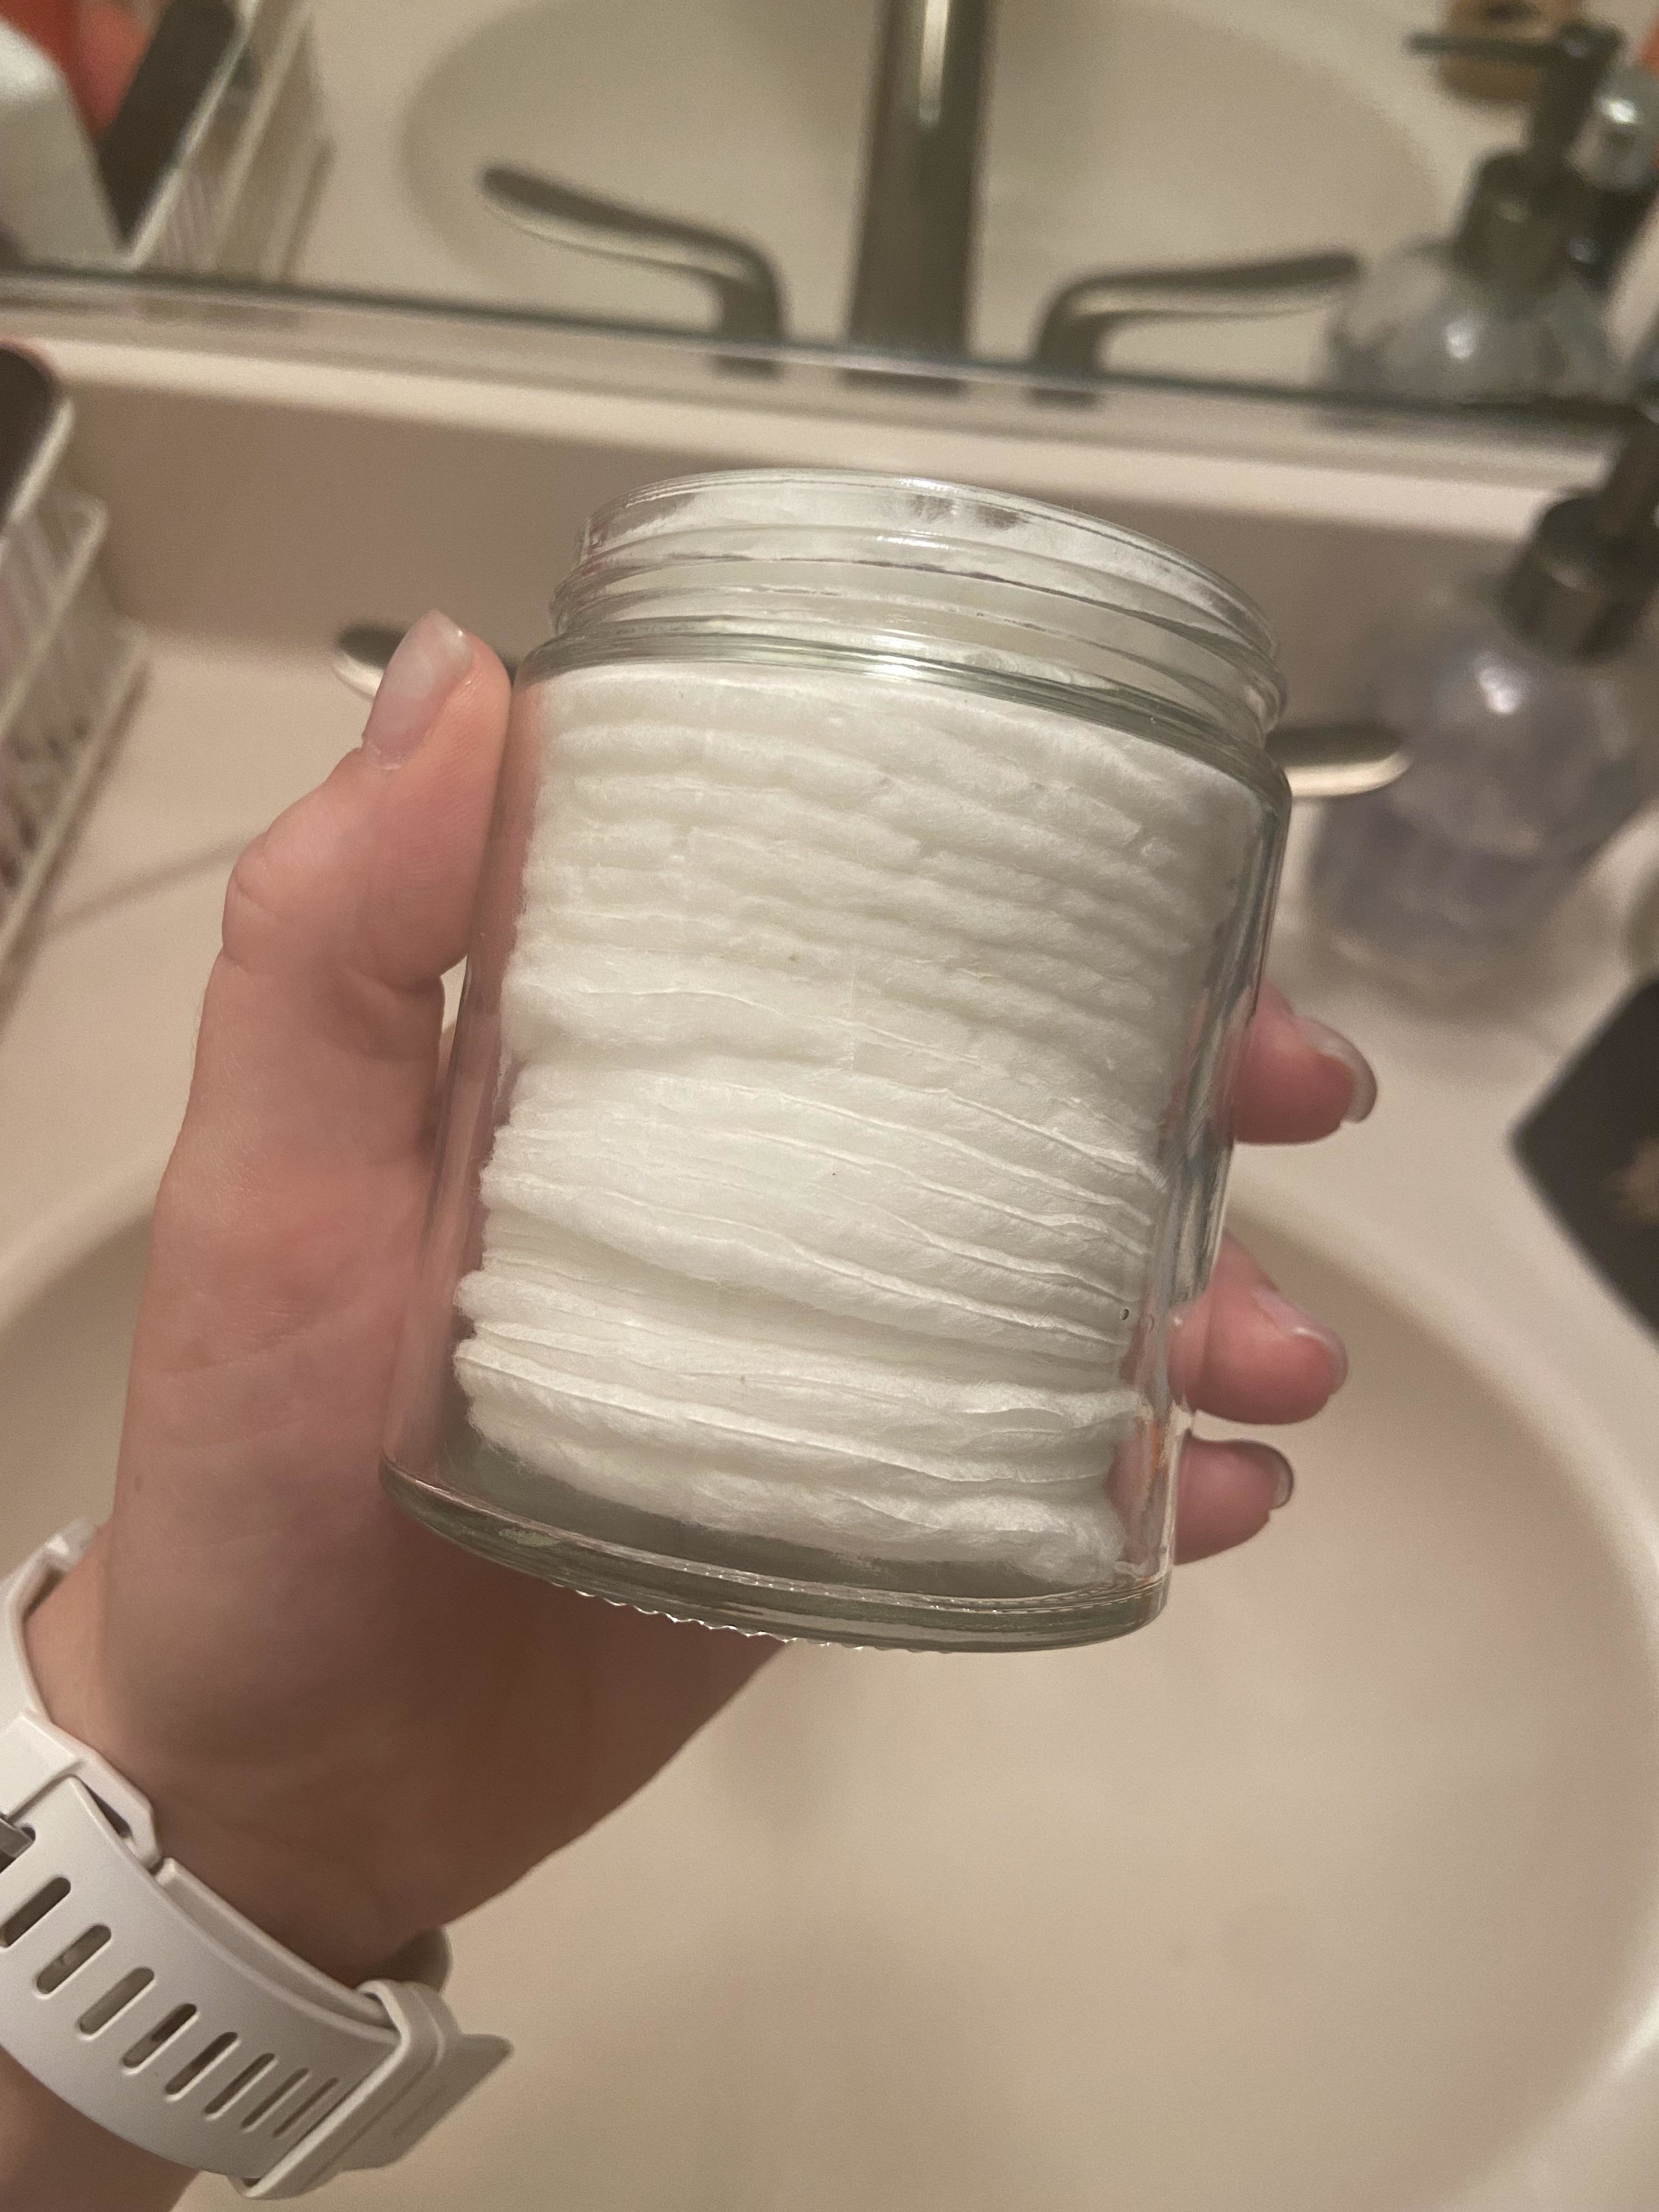 A jar of cotton rounds.